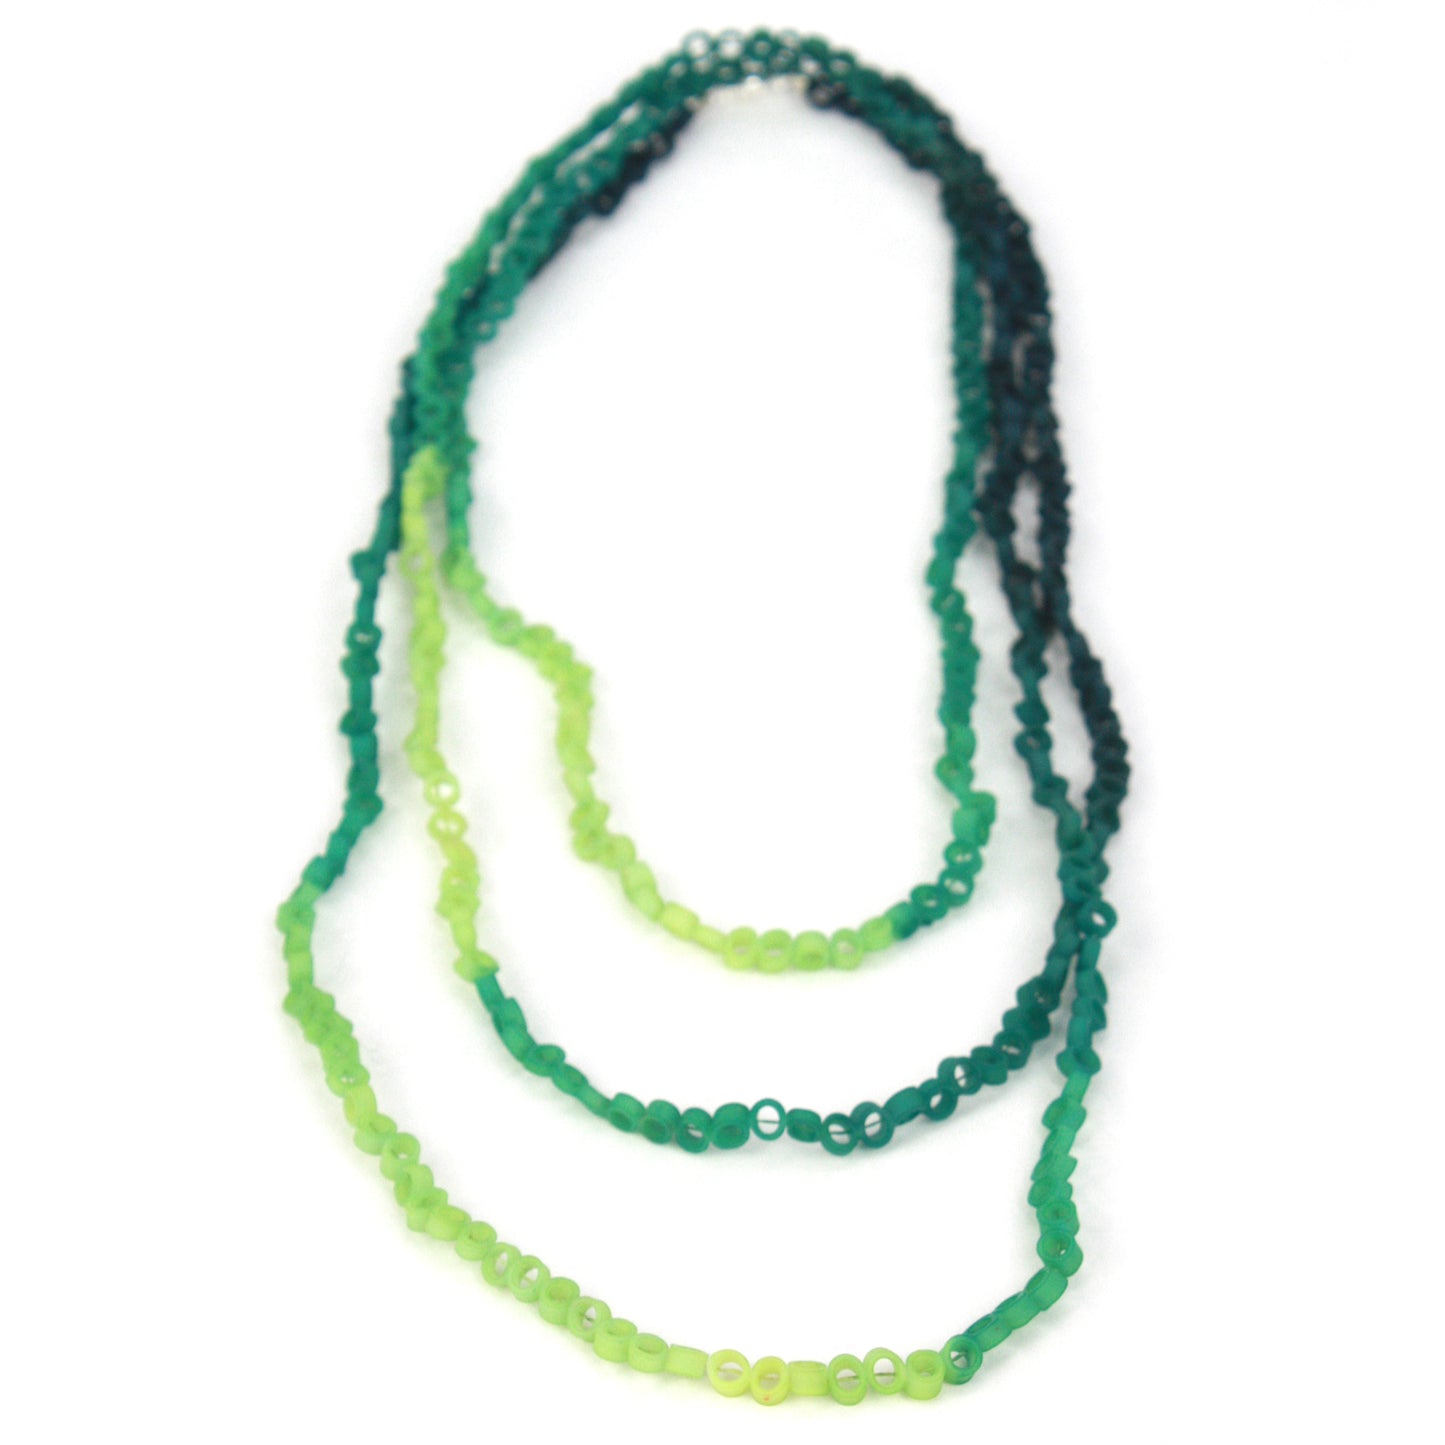 Little links necklace - Greens